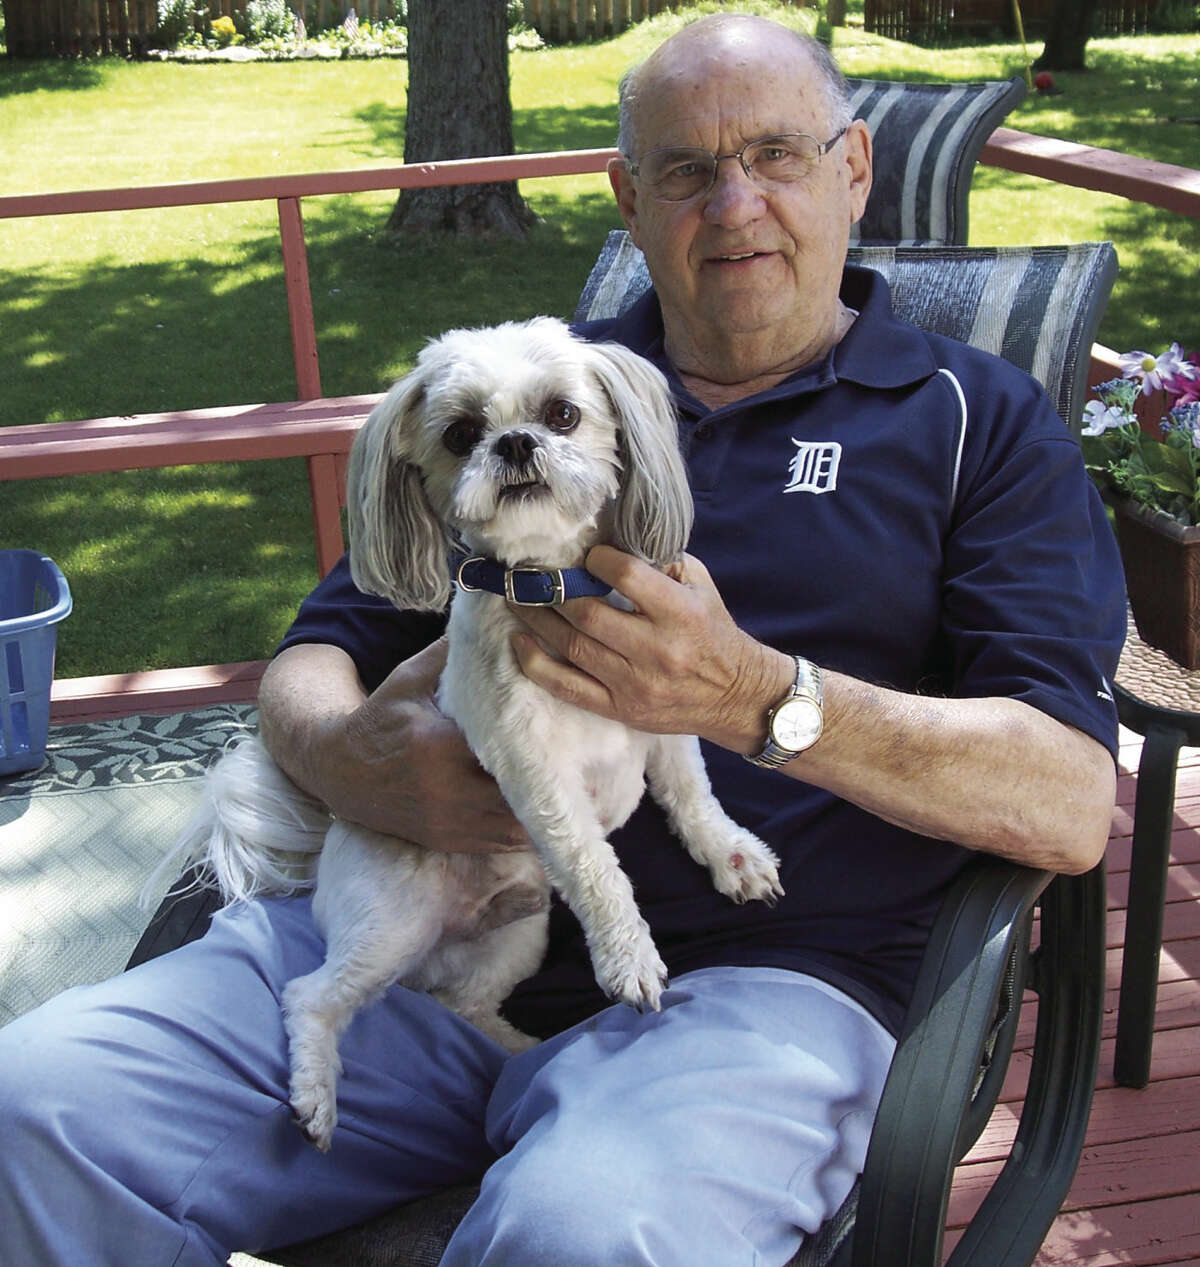 Don Weiss is a retired barber, avid sports fan and very active member of the Elkton Lions Club.